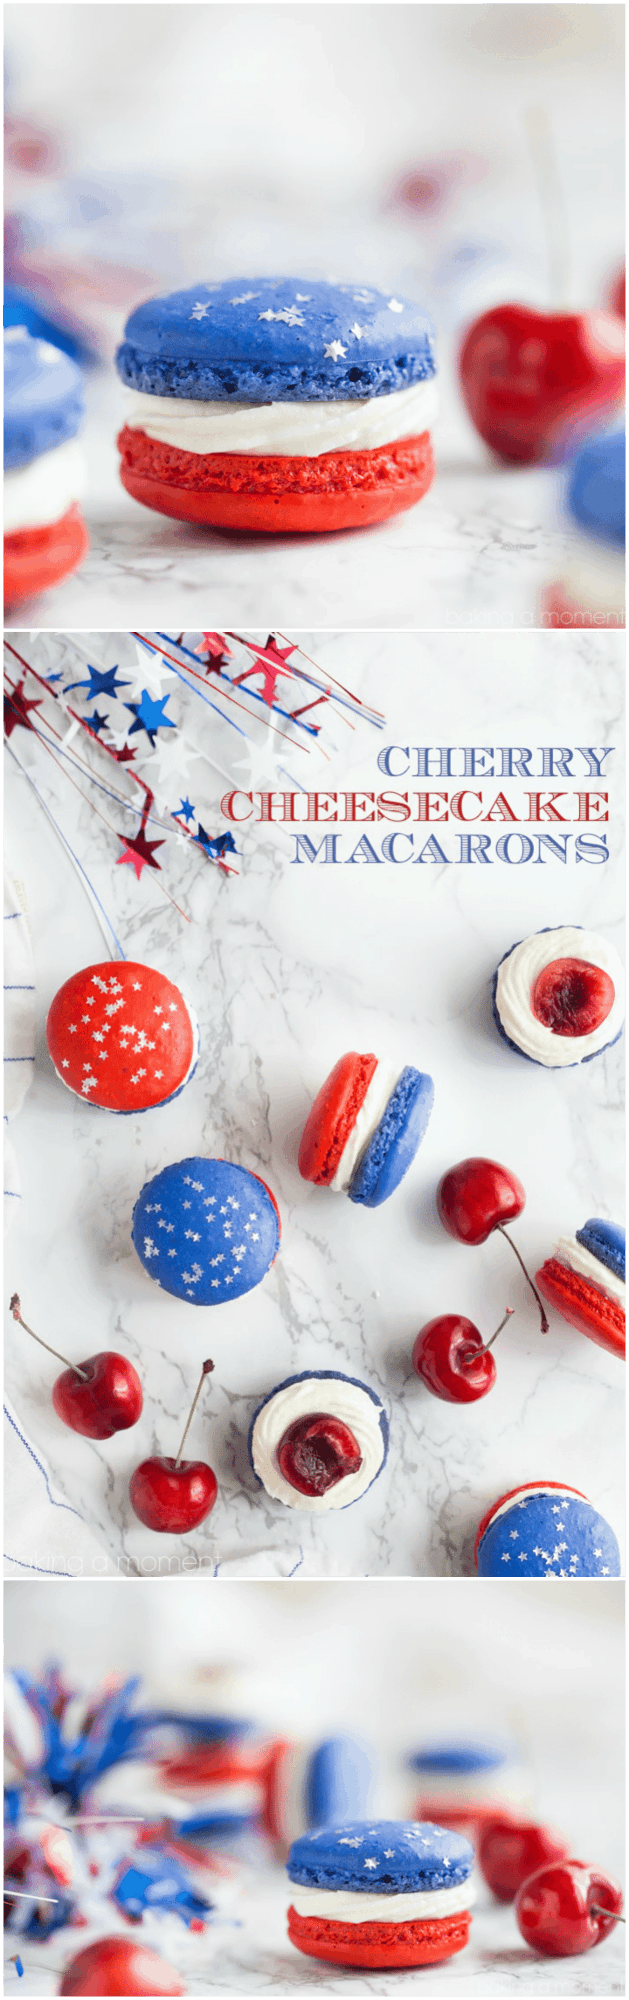 Red, White, and Blue Cherry Cheesecake Macarons: so much fun for a barbecue! Loved the patriotic colors- definitely on my must-make list for Memorial Day or July 4th.